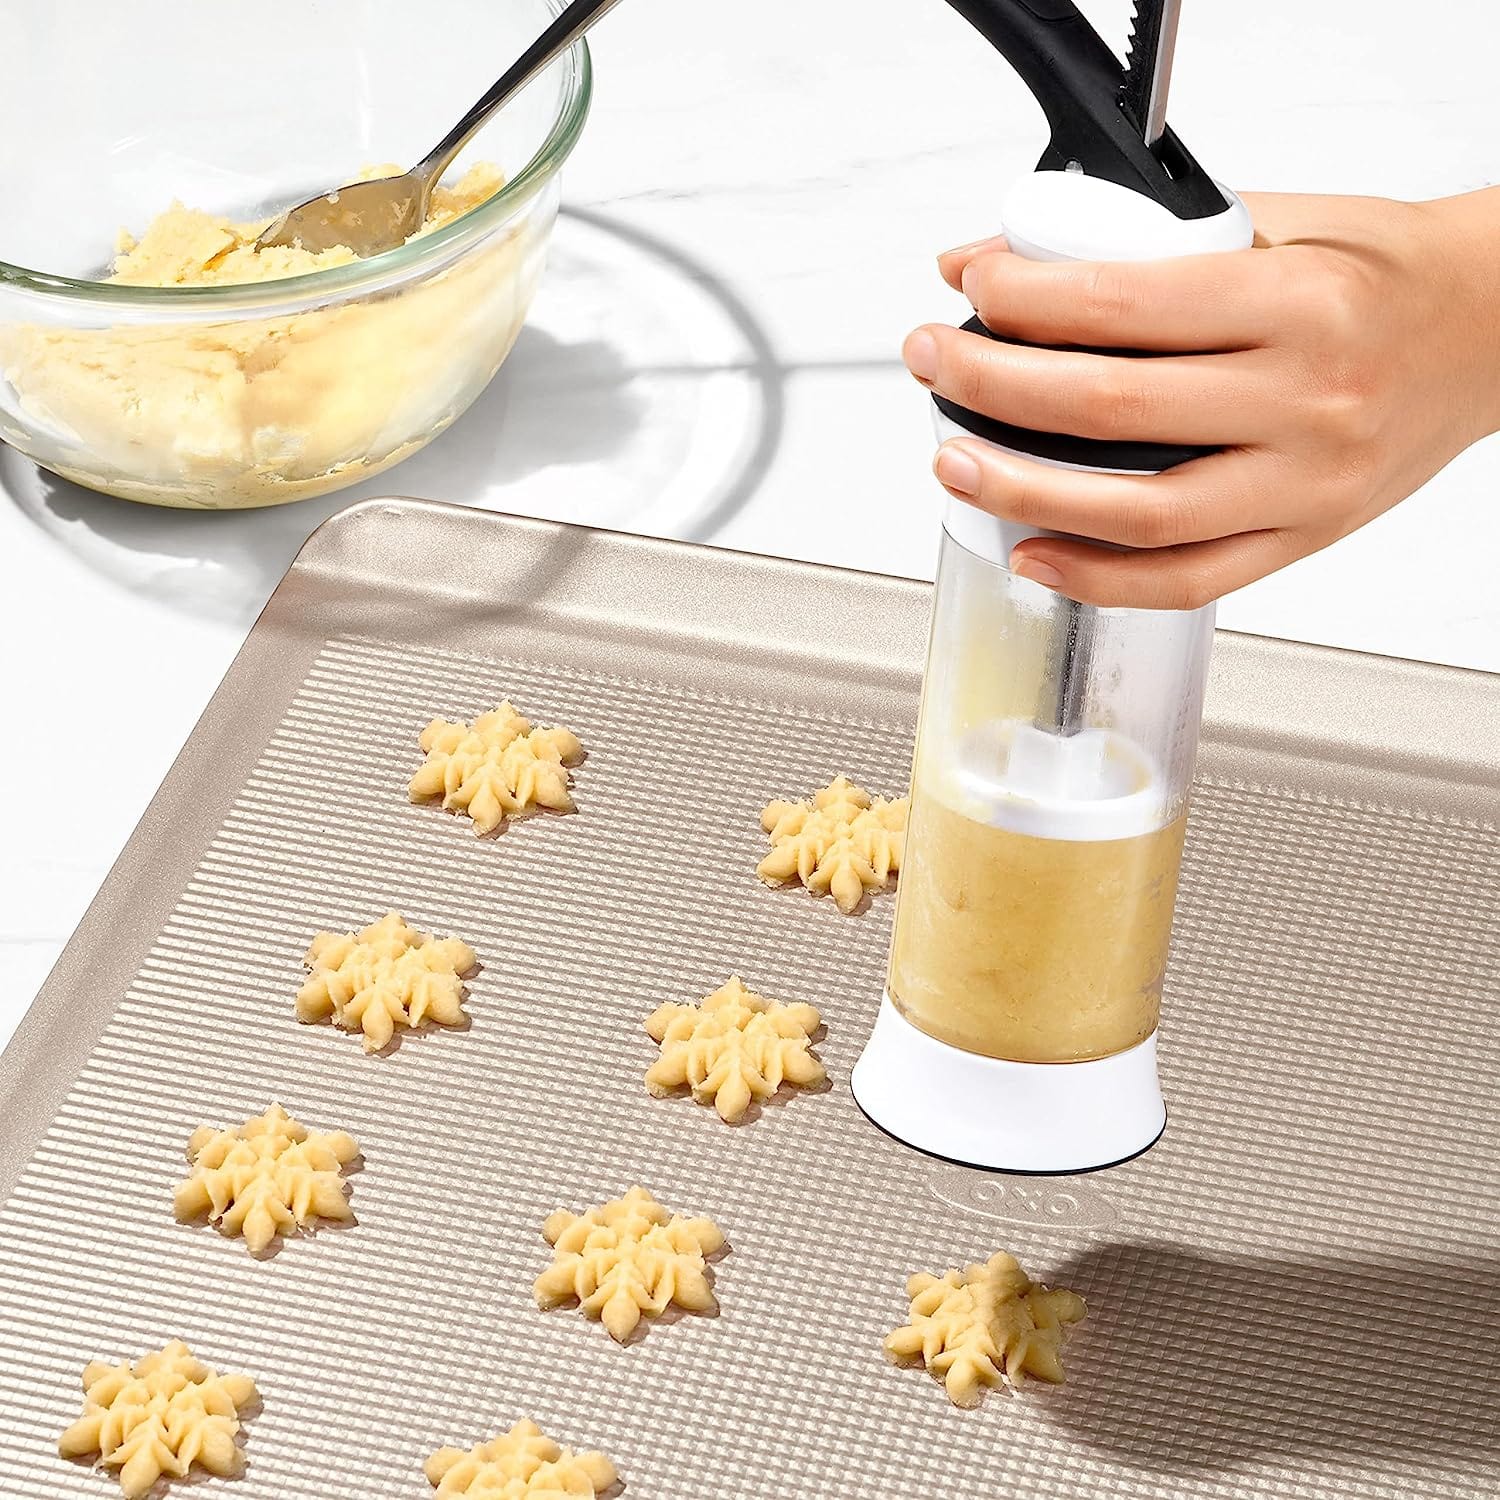 HOW TO MAKE COOKIE PRESS COOKIES // OXO COOKIE PRESS REVIEW 